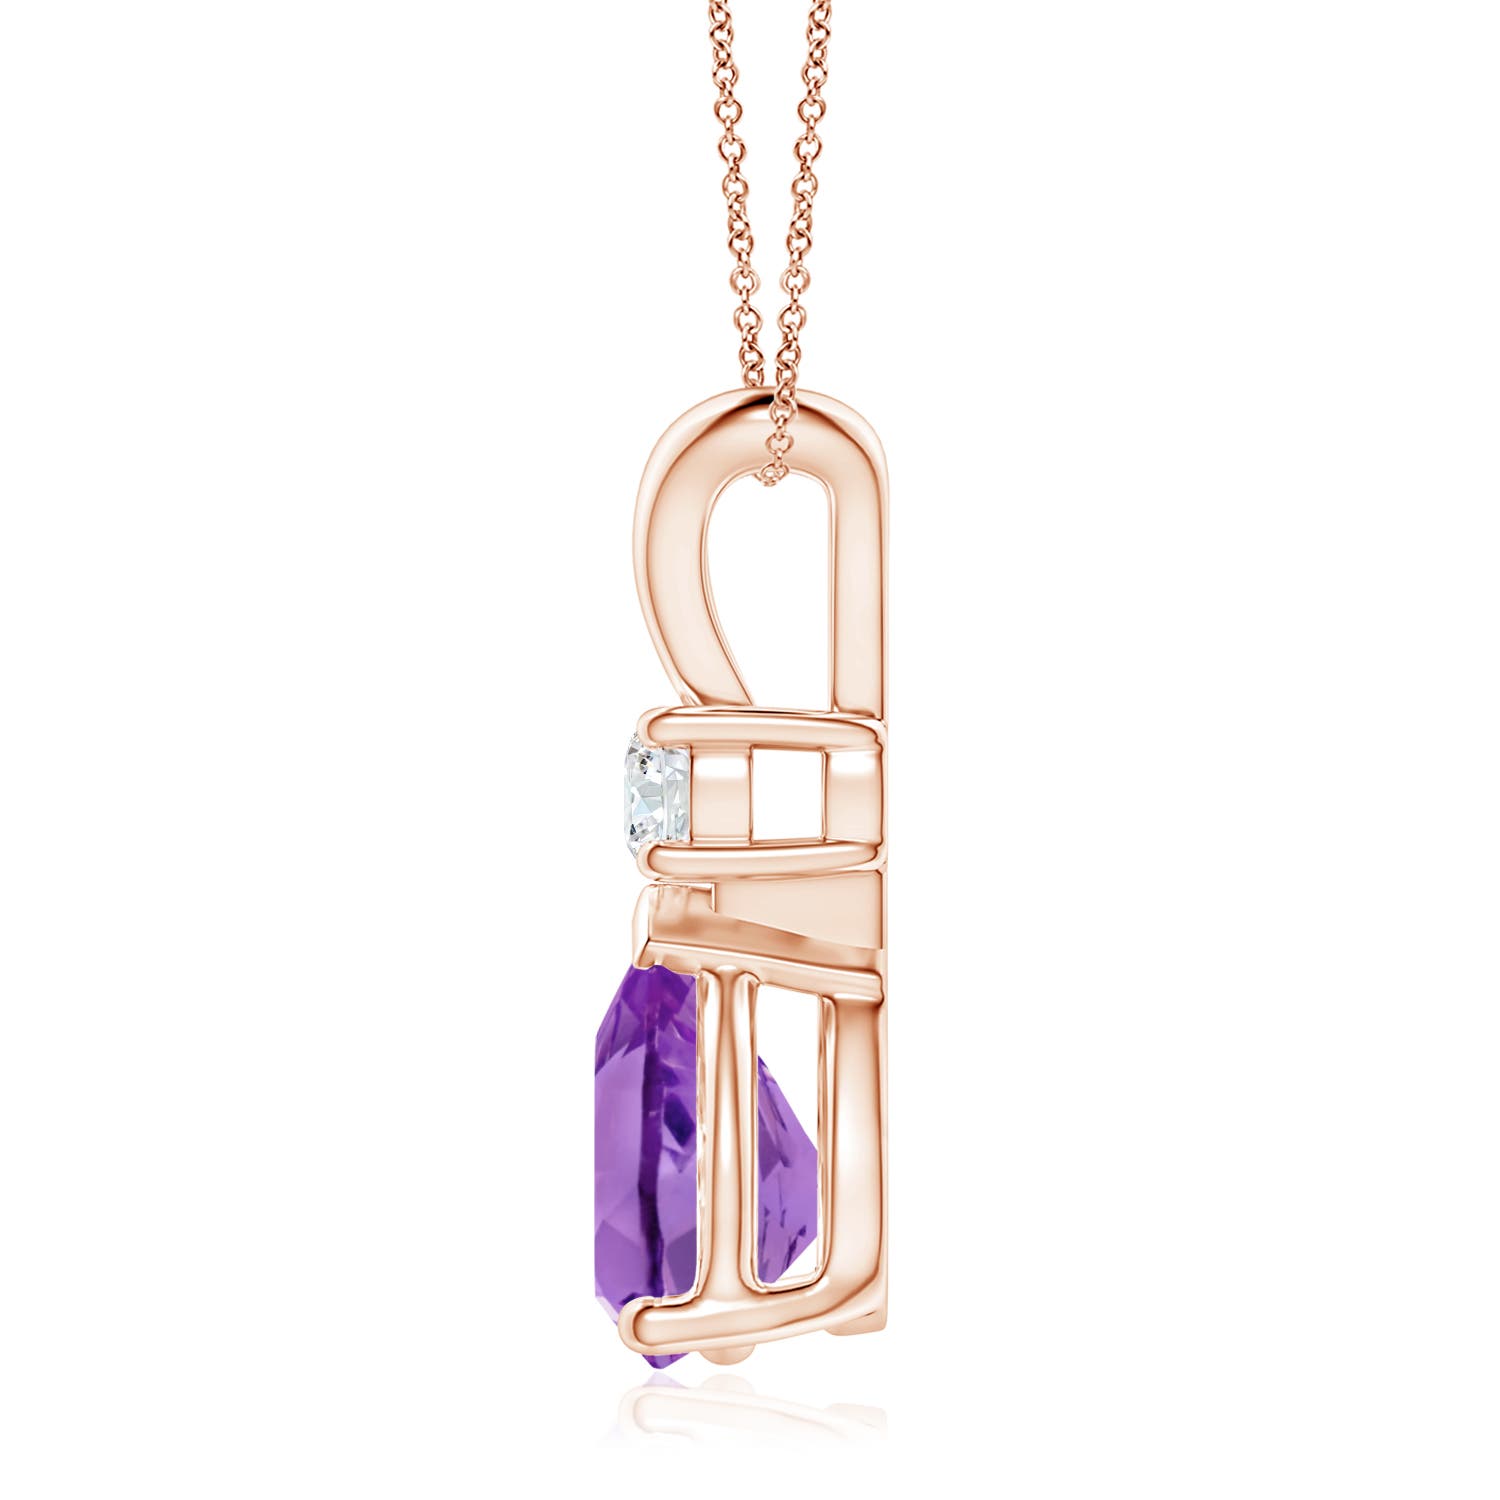 AA - Amethyst / 2.78 CT / 14 KT Rose Gold